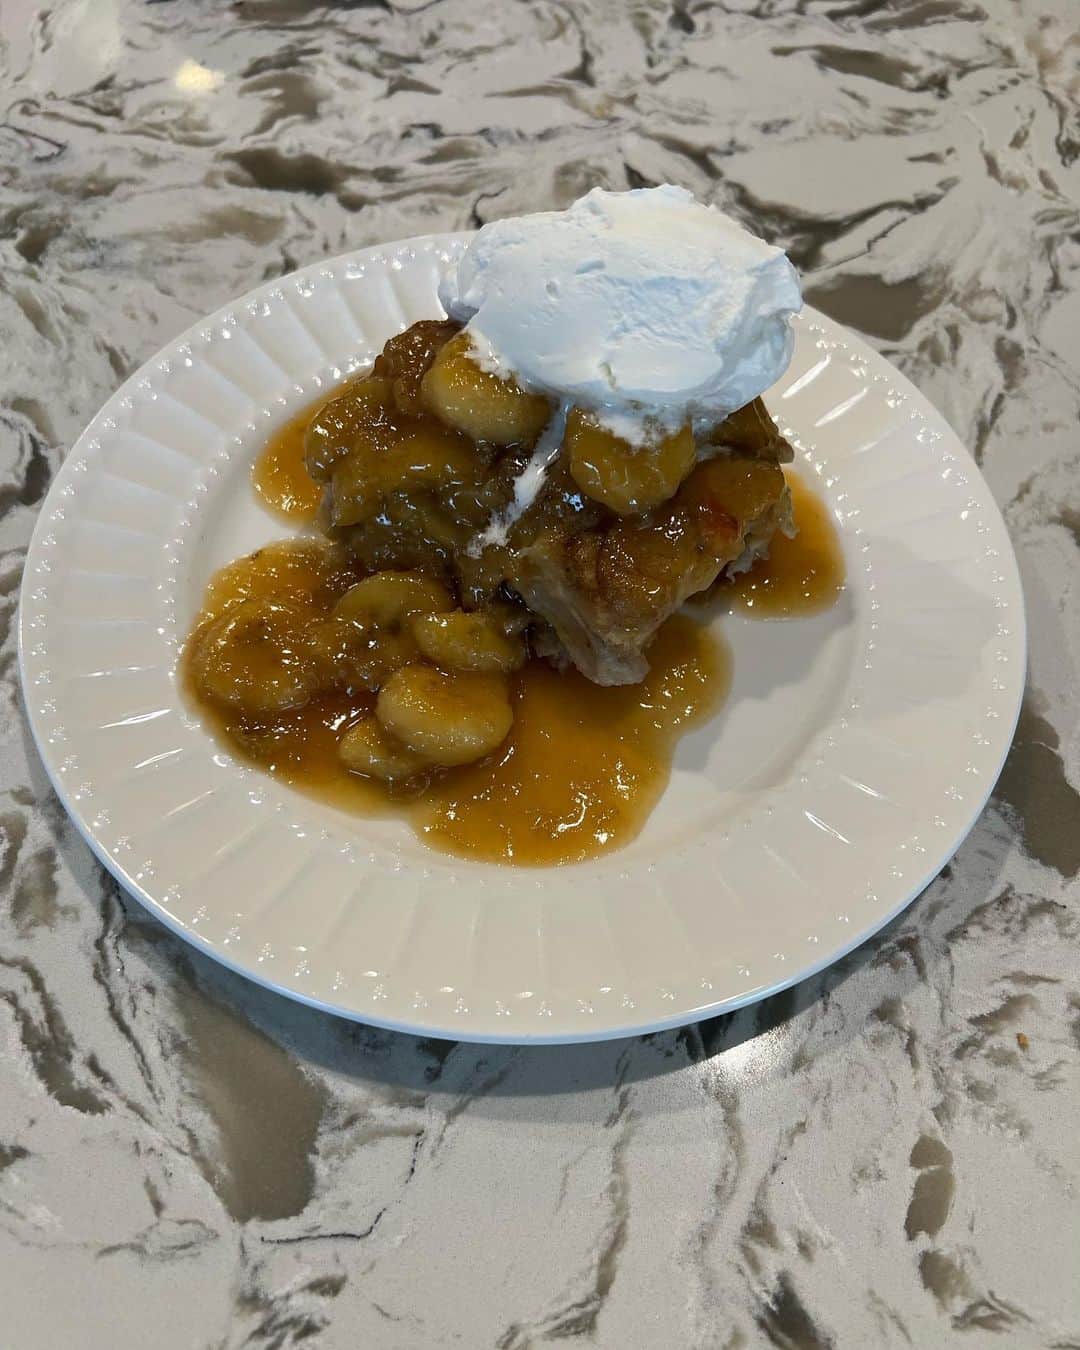 ginger and sproutのインスタグラム：「Bananas foster bread pudding with rum whipped cream! This is on a whole other level! #tjsbananacontest (I got all of my ingredients at Trader Joe’s except the rum and banana liquor) Bread pudding: 2 loaves brioche cut into squares  4 bananas sliced.  1/2 cup brown sugar.  1 Tablespoon vanilla (I used the bourbon one) 2 tsp cinnamon  6 cups milk (any kind will work!). 6 eggs.  Bananas Fosters Sauce: 8 Tbls butter.  3/4 cup brown sugar.  6 bananas sliced.  4 Tbls spiced rum and 4 tbls banana liquor. (Shooters are exactly 4 Tbls)  1tsp salt  Whipped cream: Pint heavy cream.  4 Tbls spiced rum (1shooter). 1/2 c powdered sugar or more if you like sweeter.  Directions: Pre head oven to 375. Mix bread and bananas and put in a baking dish Mix together the rest of ingredients and pour over bread mixture Press down lightly, the liquid should slightly come up between your fingers. If not simply pour in a little more milk.  Cover with foil and bake about 45 minutes. Uncover and bake another 10-15 minutes. It will puff up. When you press on it it will feel spongy and bouncy if there is too much liquid keep baking. When you take it out of the oven it will shrink. That’s ok!   Fosters Mix Melt butter and sugar in sauce pan. Keep stirring. When it starts to bubble for a minute add the bananas, mix, then the liquor and a tsp salt. Poor over bread pudding in pan, or scoop it over sliced pudding. Top with whipped cream!!  (Feeds a crowd! Like 8-12)」